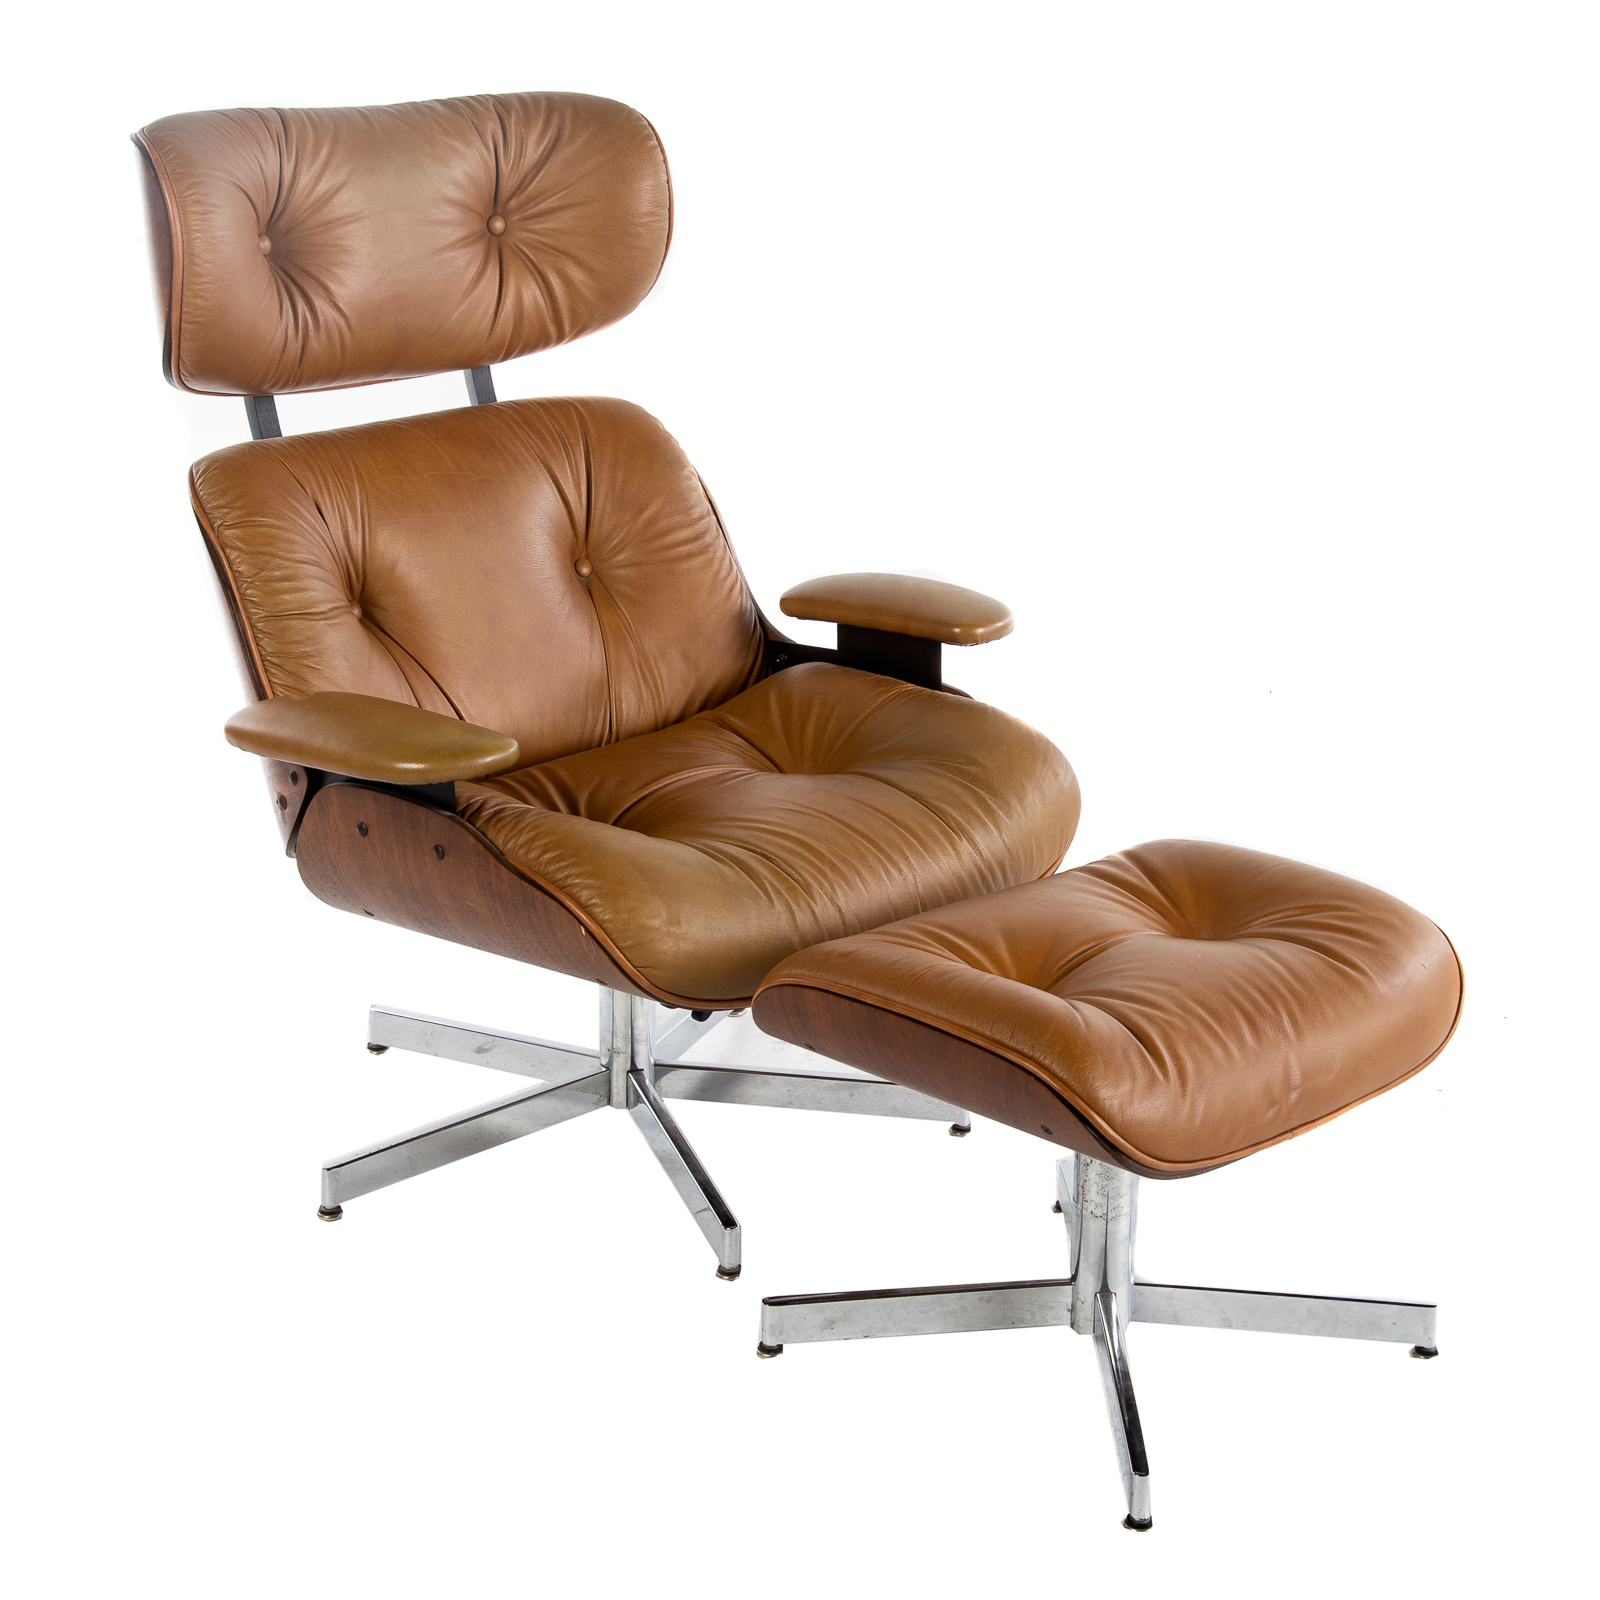 EAMES STYLE CHAIR & OTTOMAN BY